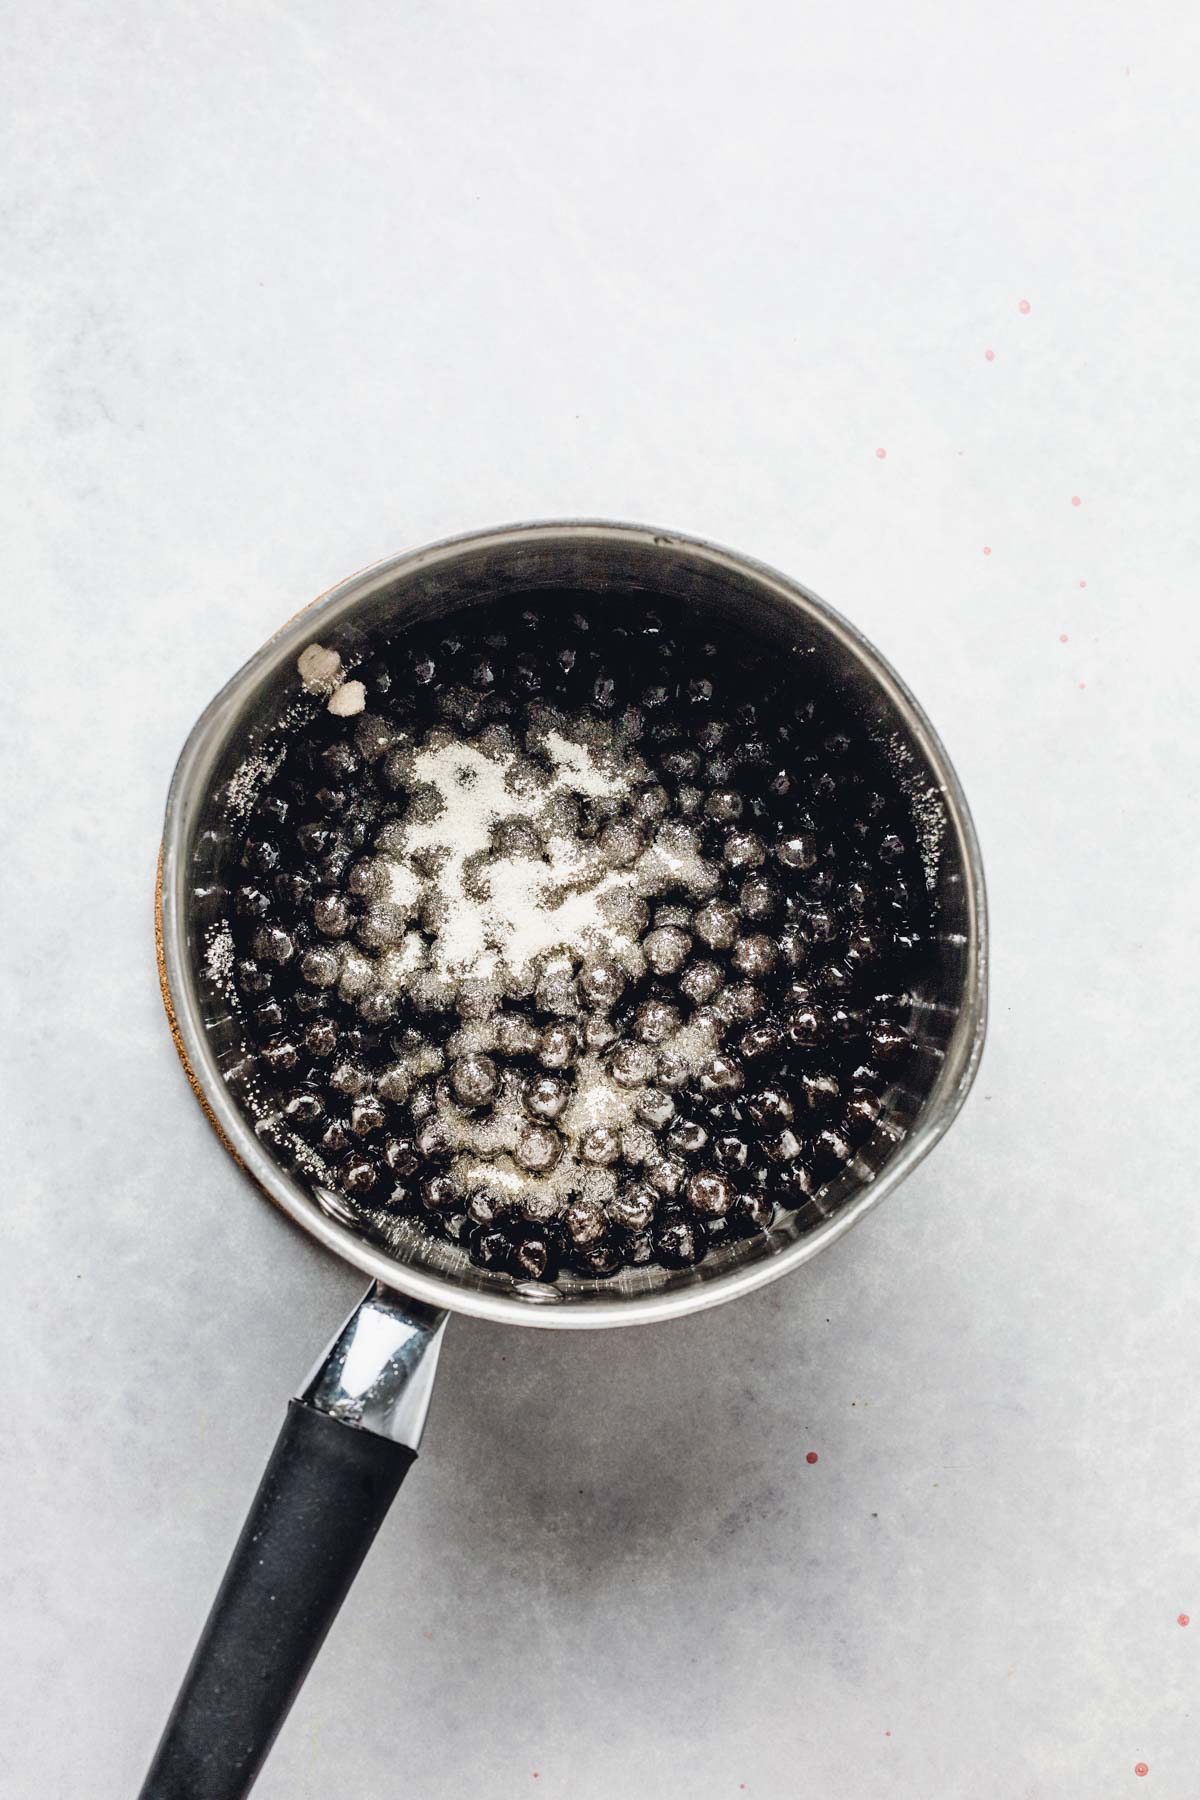 A small saucepan filled with cooked tapioca pearls and sugar on top.